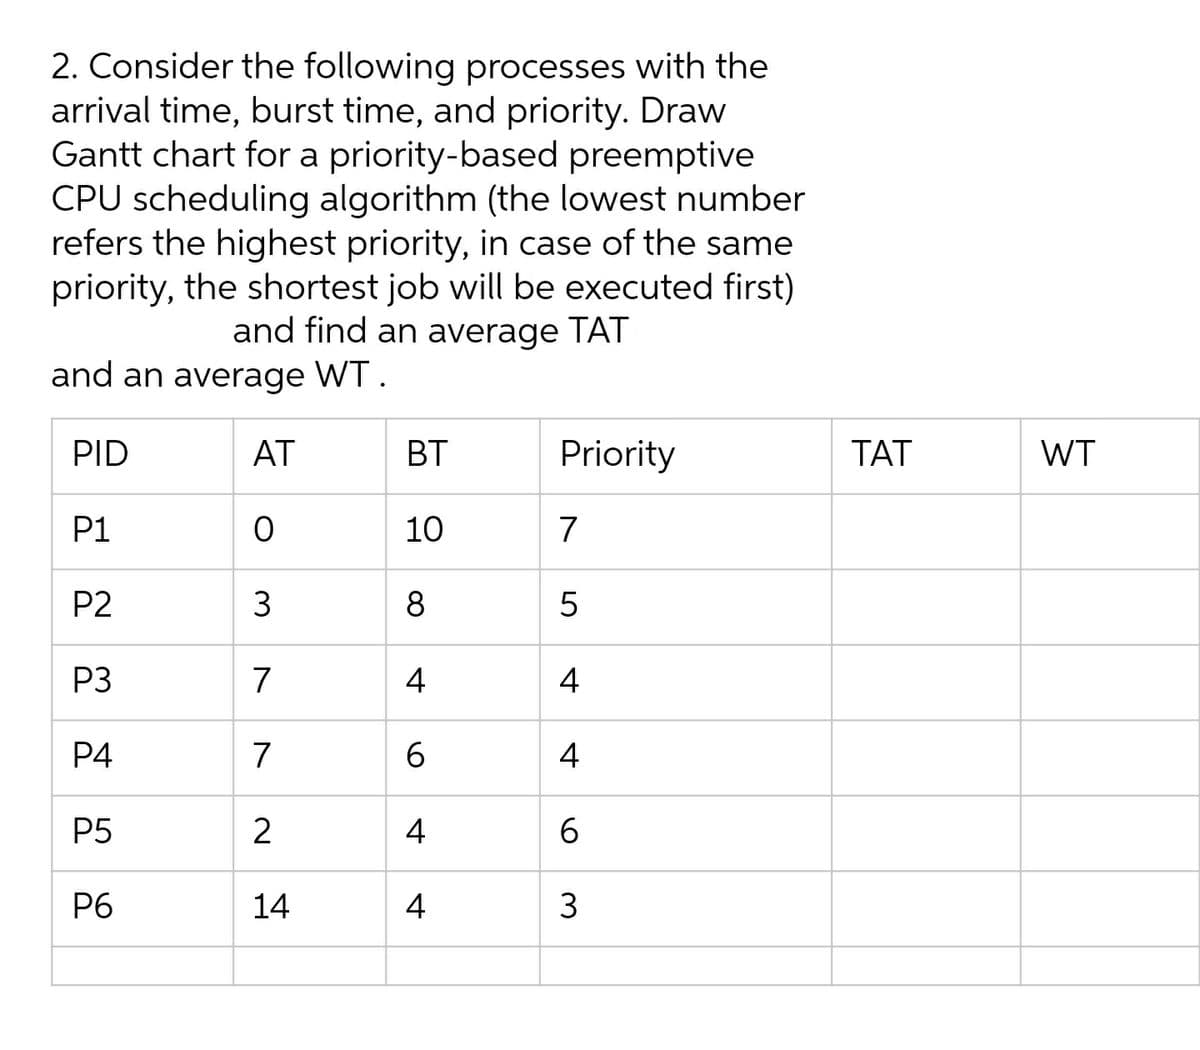 2. Consider the following processes with the
arrival time, burst time, and priority. Draw
Gantt chart for a priority-based preemptive
CPU scheduling algorithm (the lowest number
refers the highest priority, in case of the same
priority, the shortest job will be executed first)
and find an average TAT
and an average WT.
PID
AT
BT
Priority
TAT
WT
P1
10
7
P2
3
8
5
P3
7
4
4
P4
7
6.
4
P5
2
4
6.
P6
14
4
3
